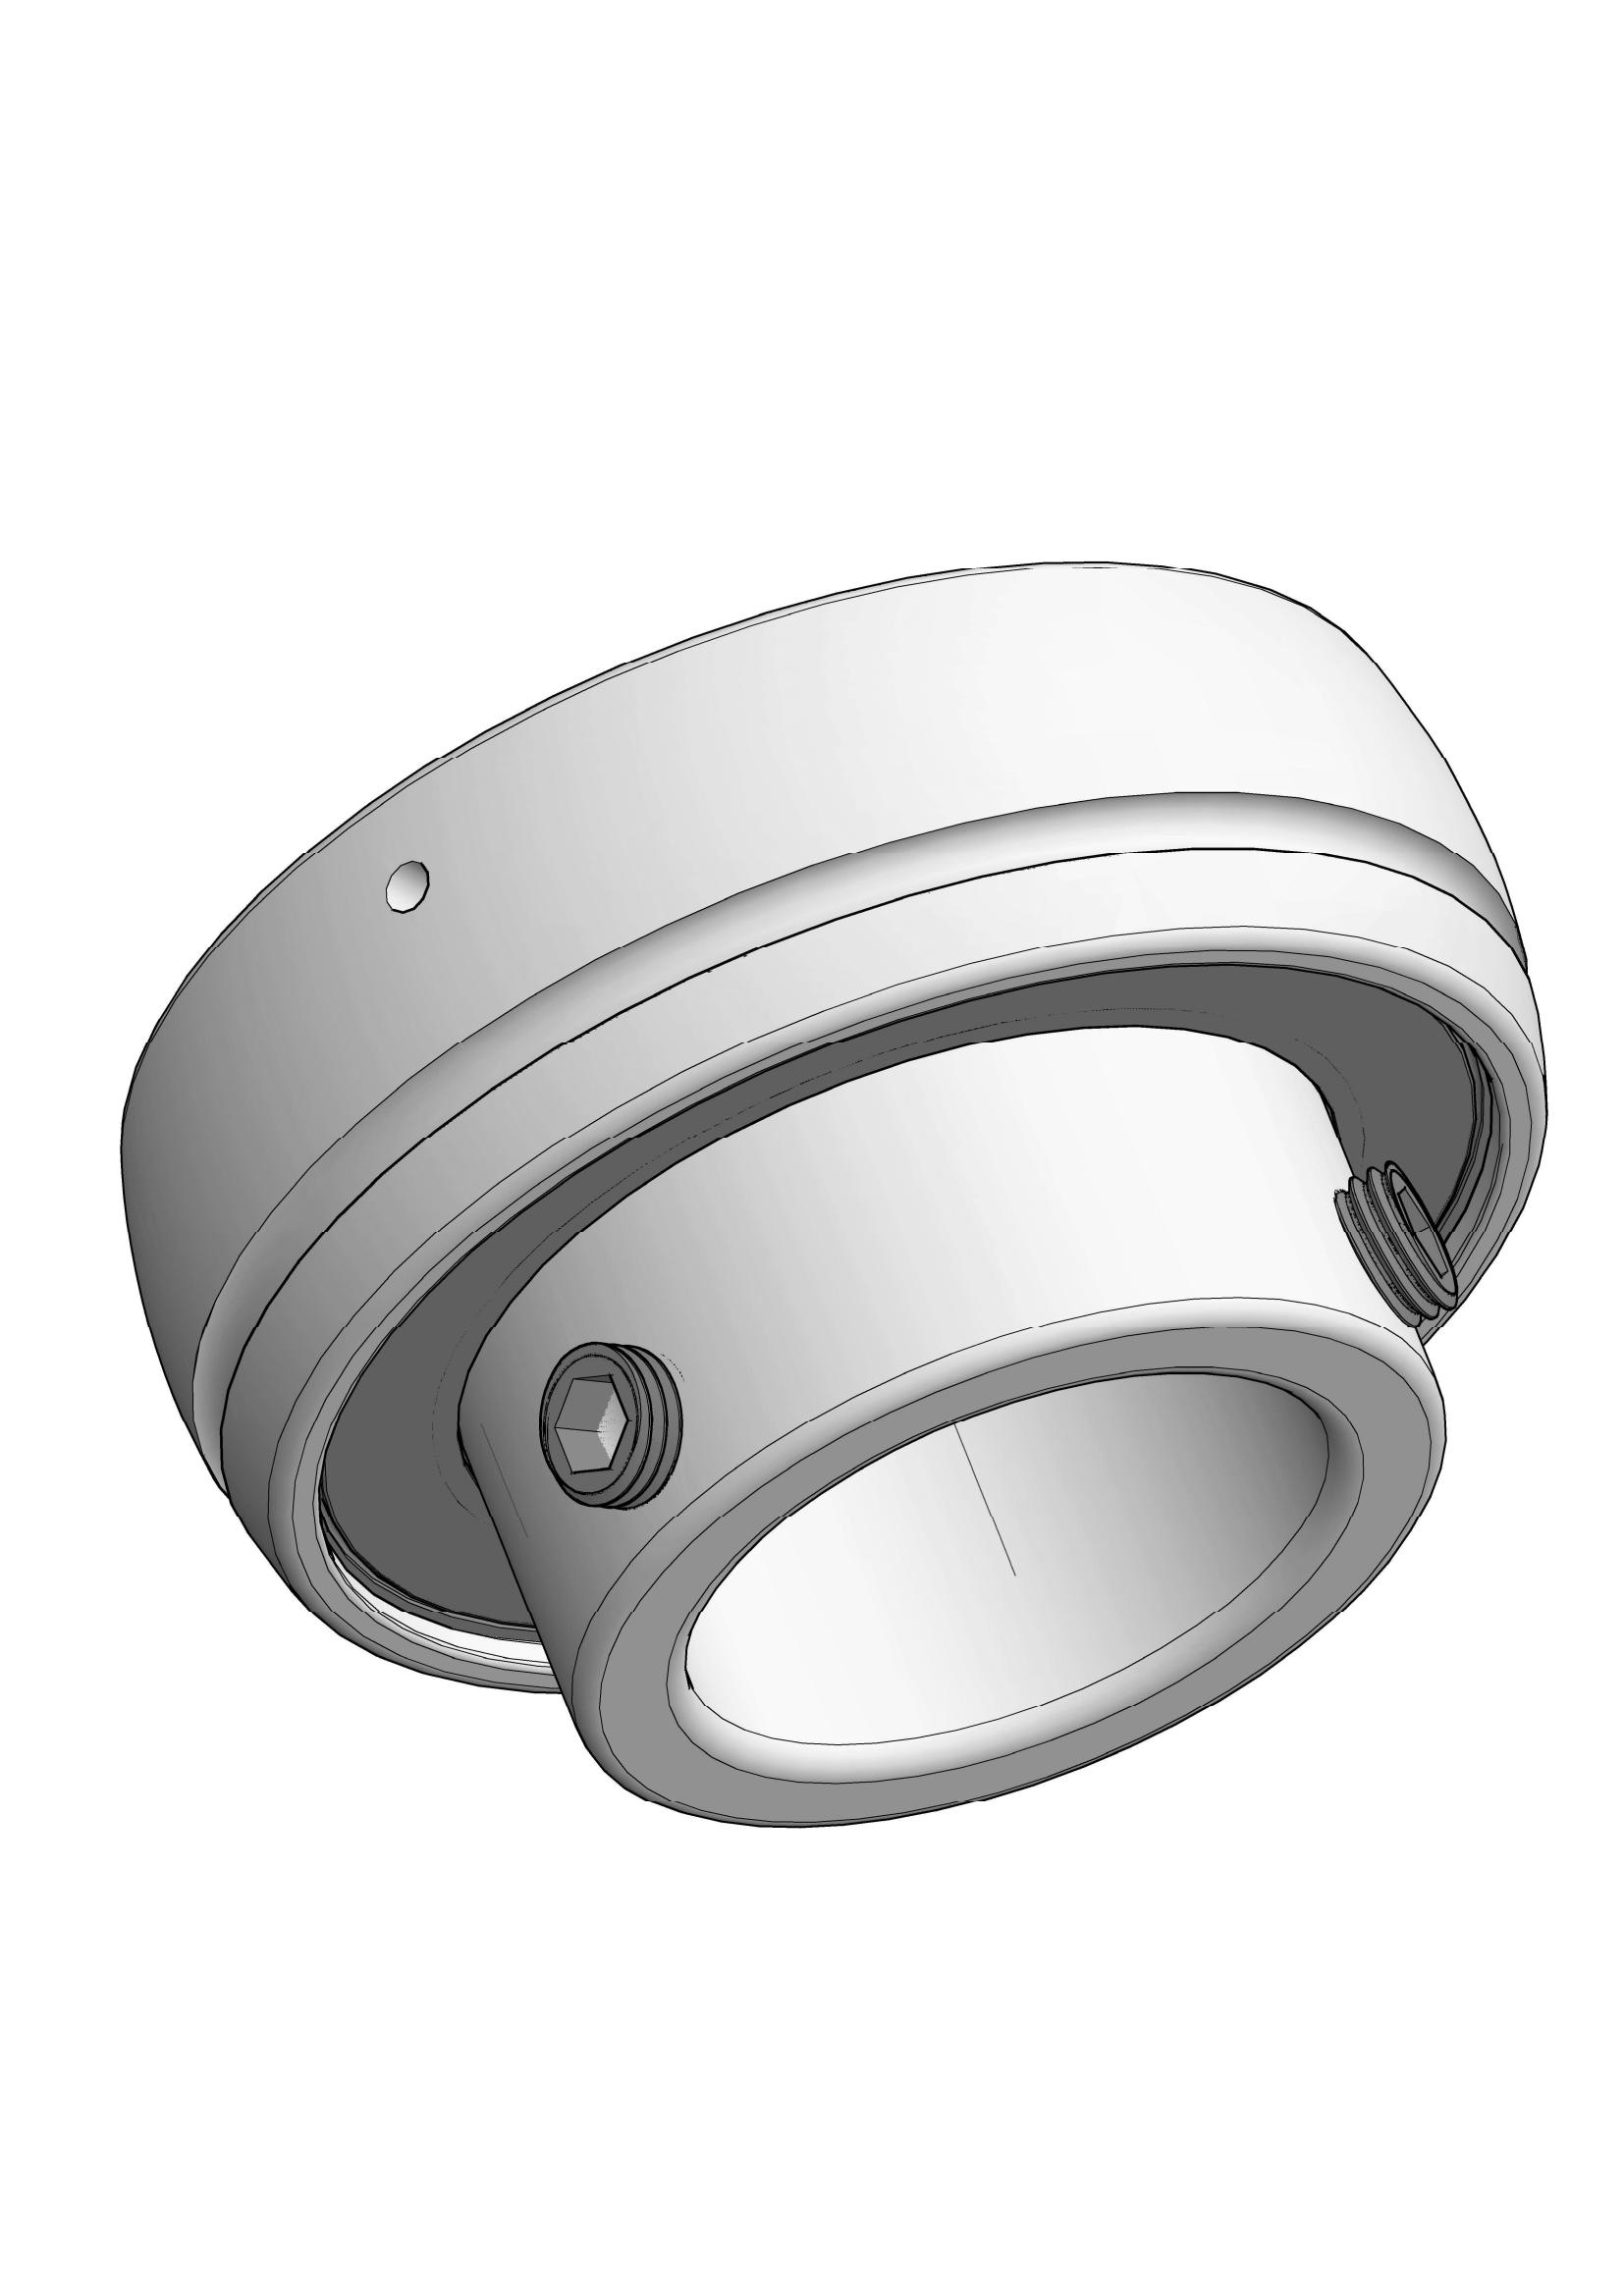 SB211-34 insert ball bearings with Eccentric Collar Lock with 2-1/8 inch Bore